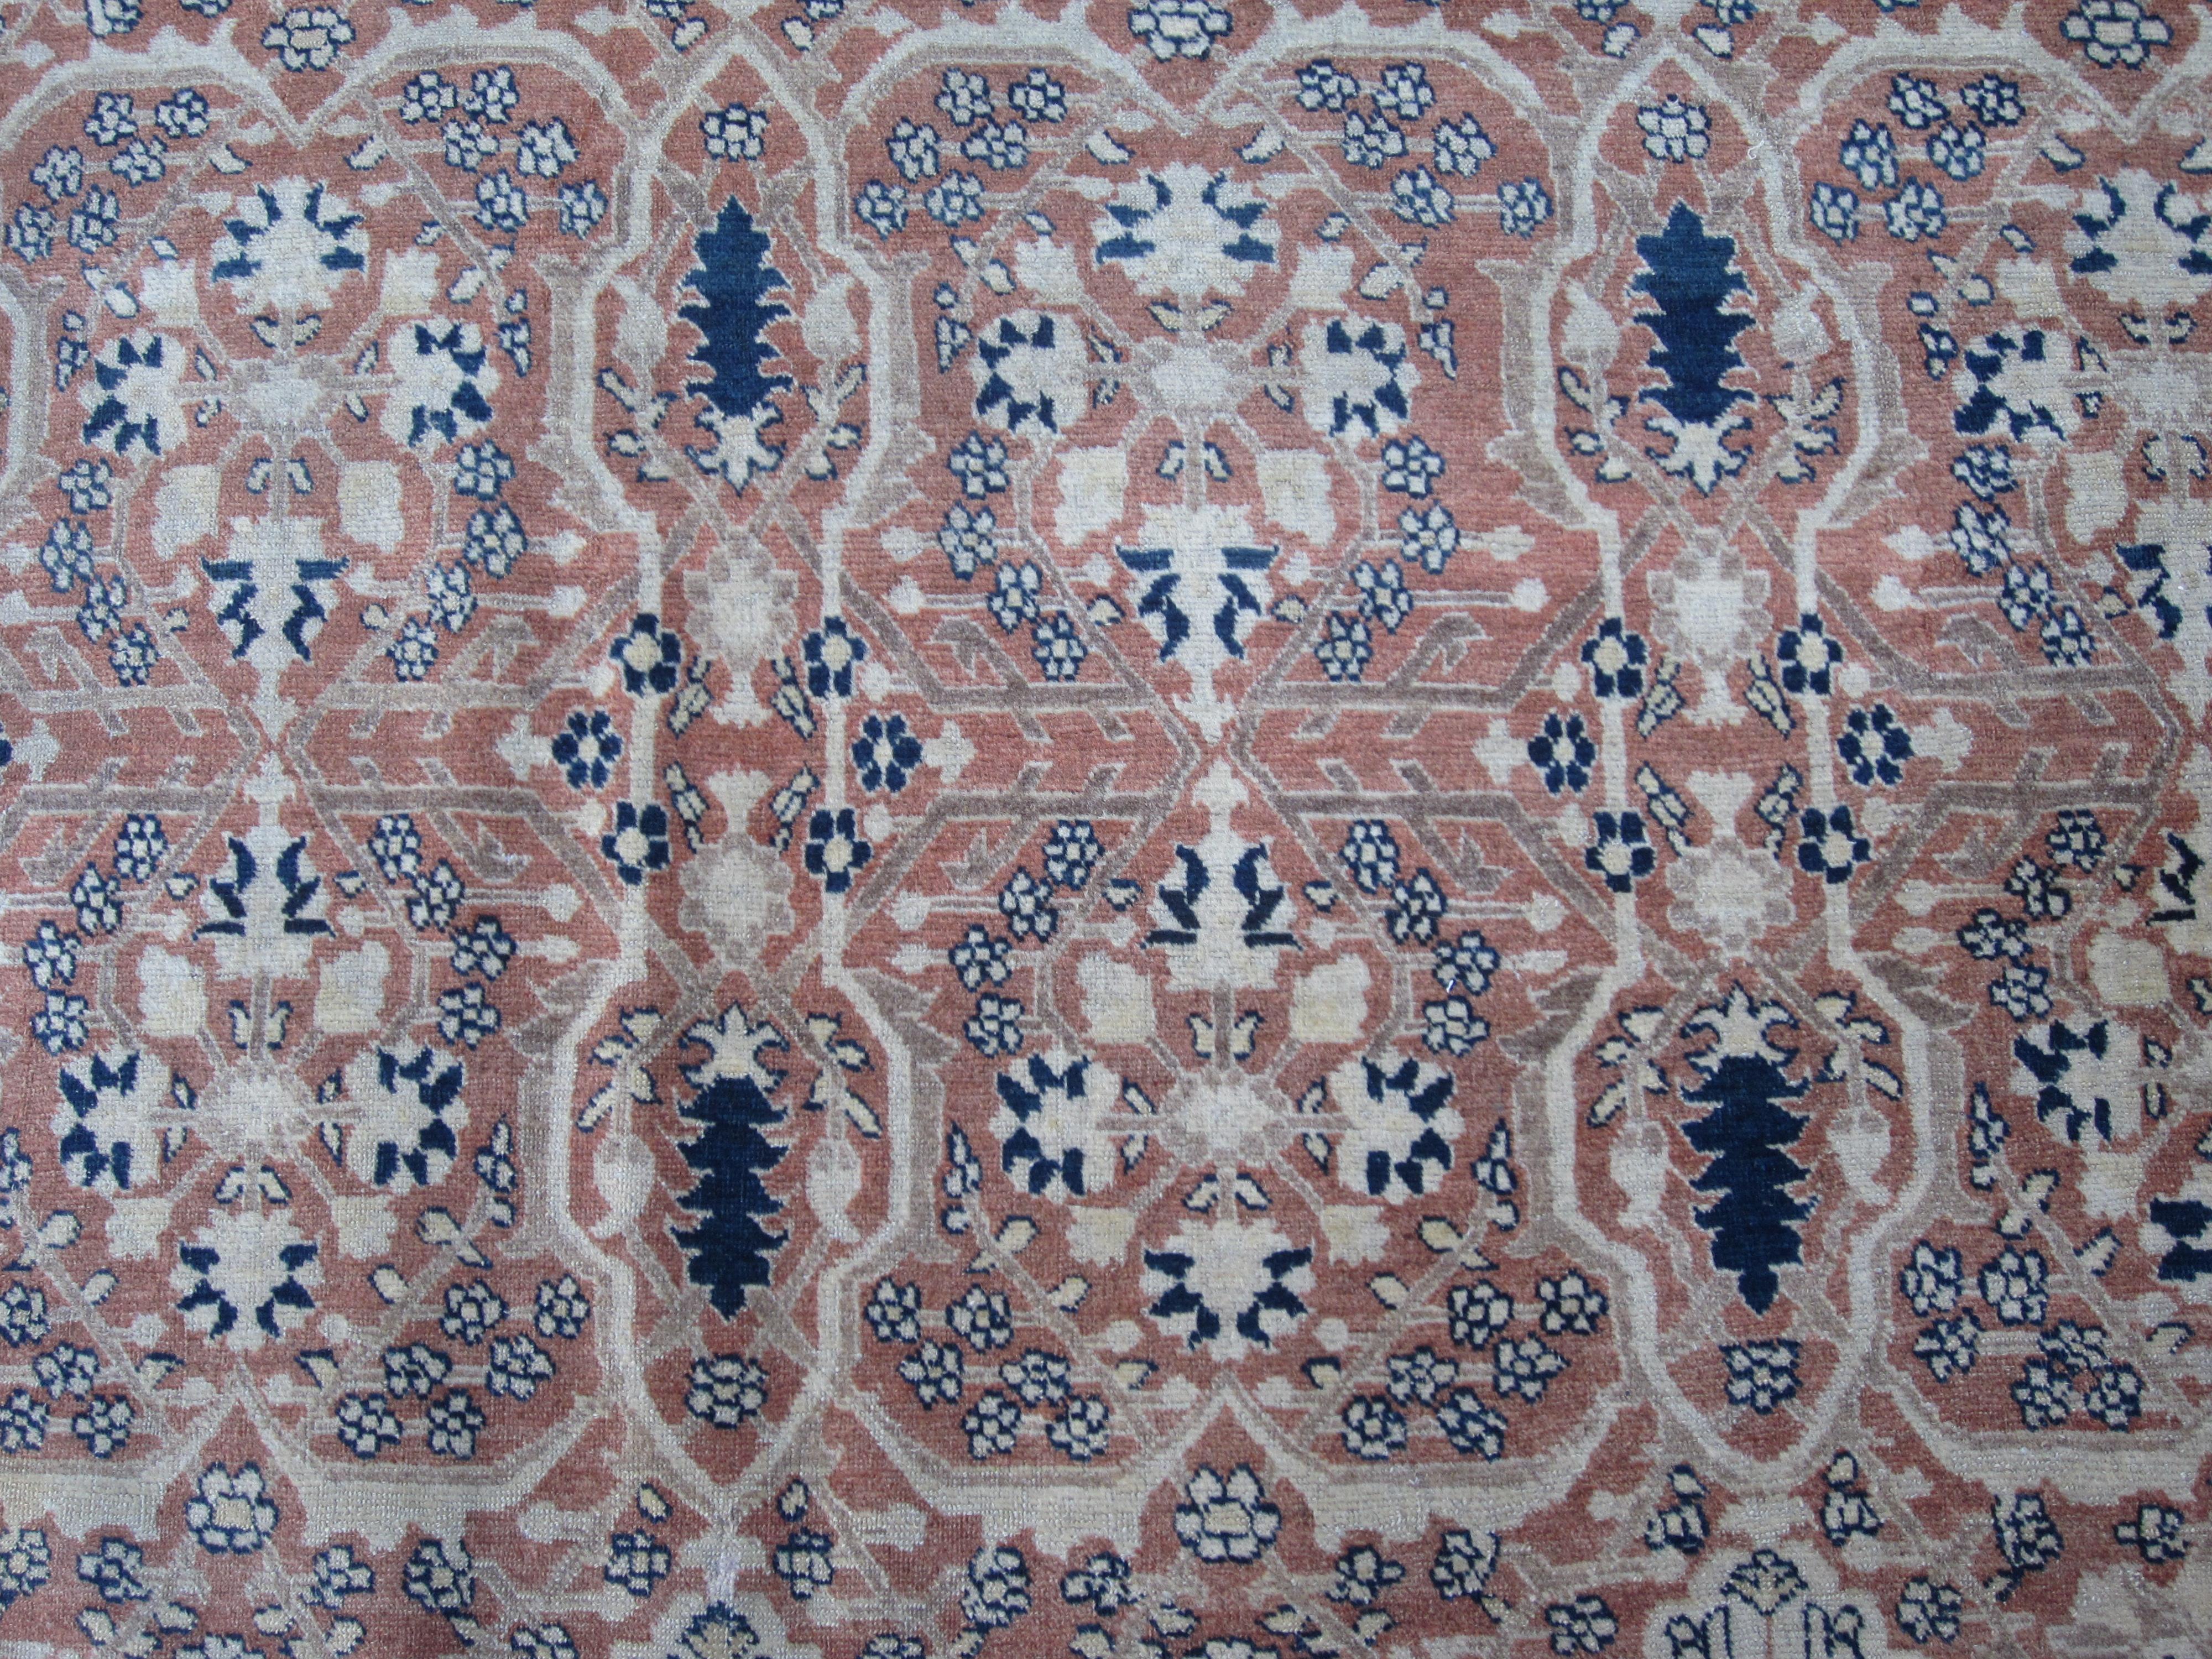 Antique Persian Hadji Jalili Tabriz Blush Pink and Blue Rug, Late 19th Century For Sale 3